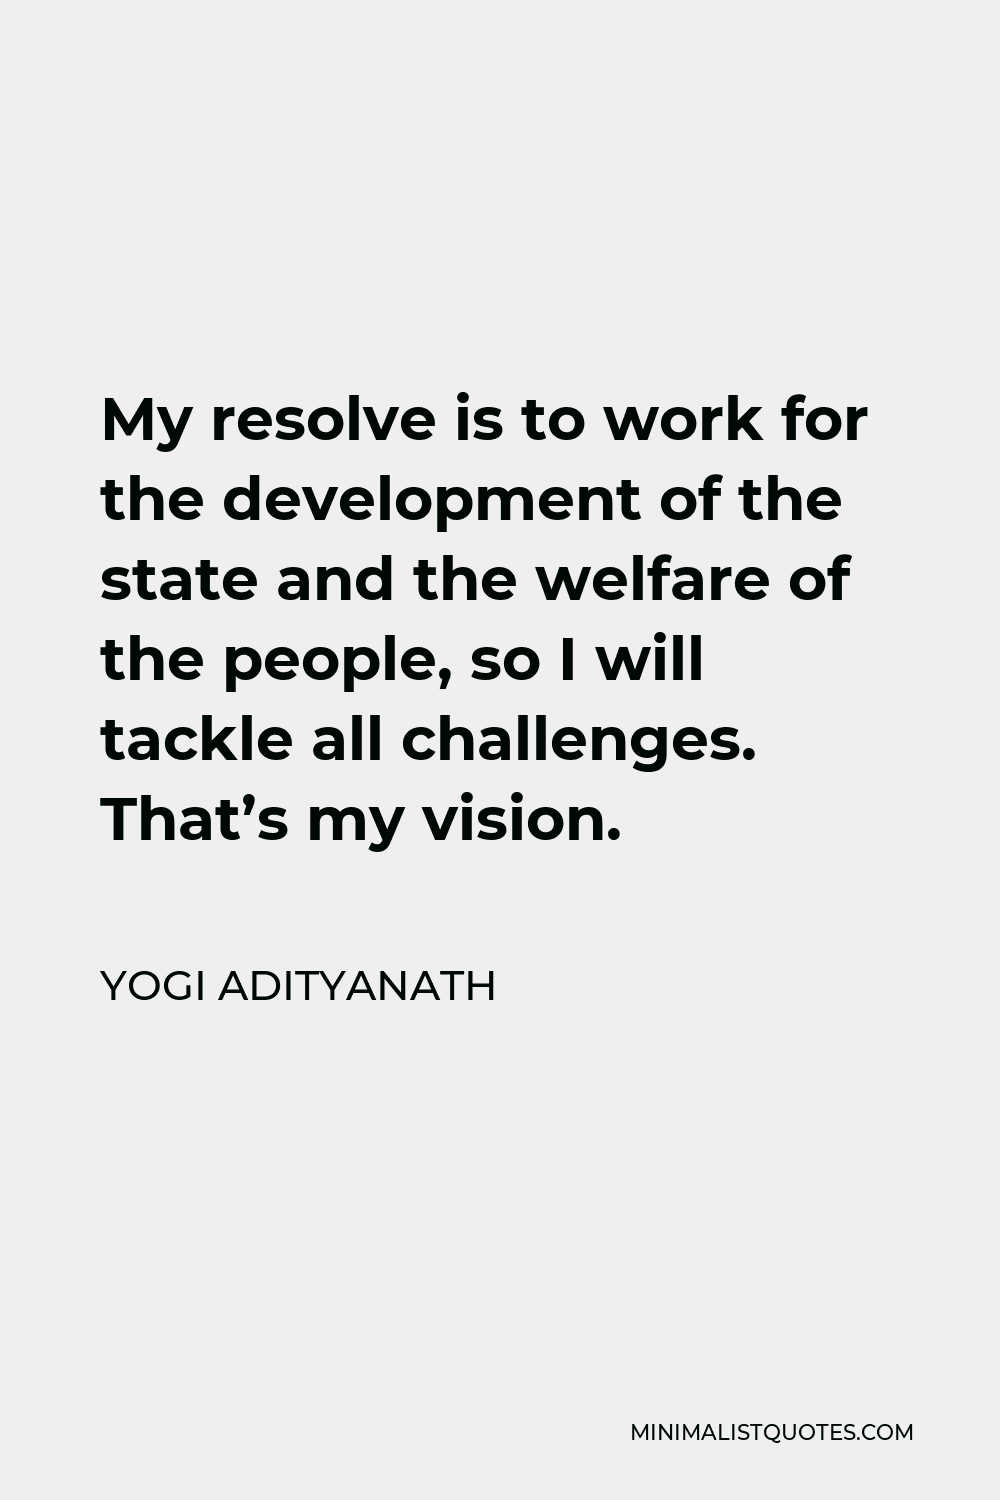 Yogi Adityanath Quote - My resolve is to work for the development of the state and the welfare of the people, so I will tackle all challenges. That’s my vision.